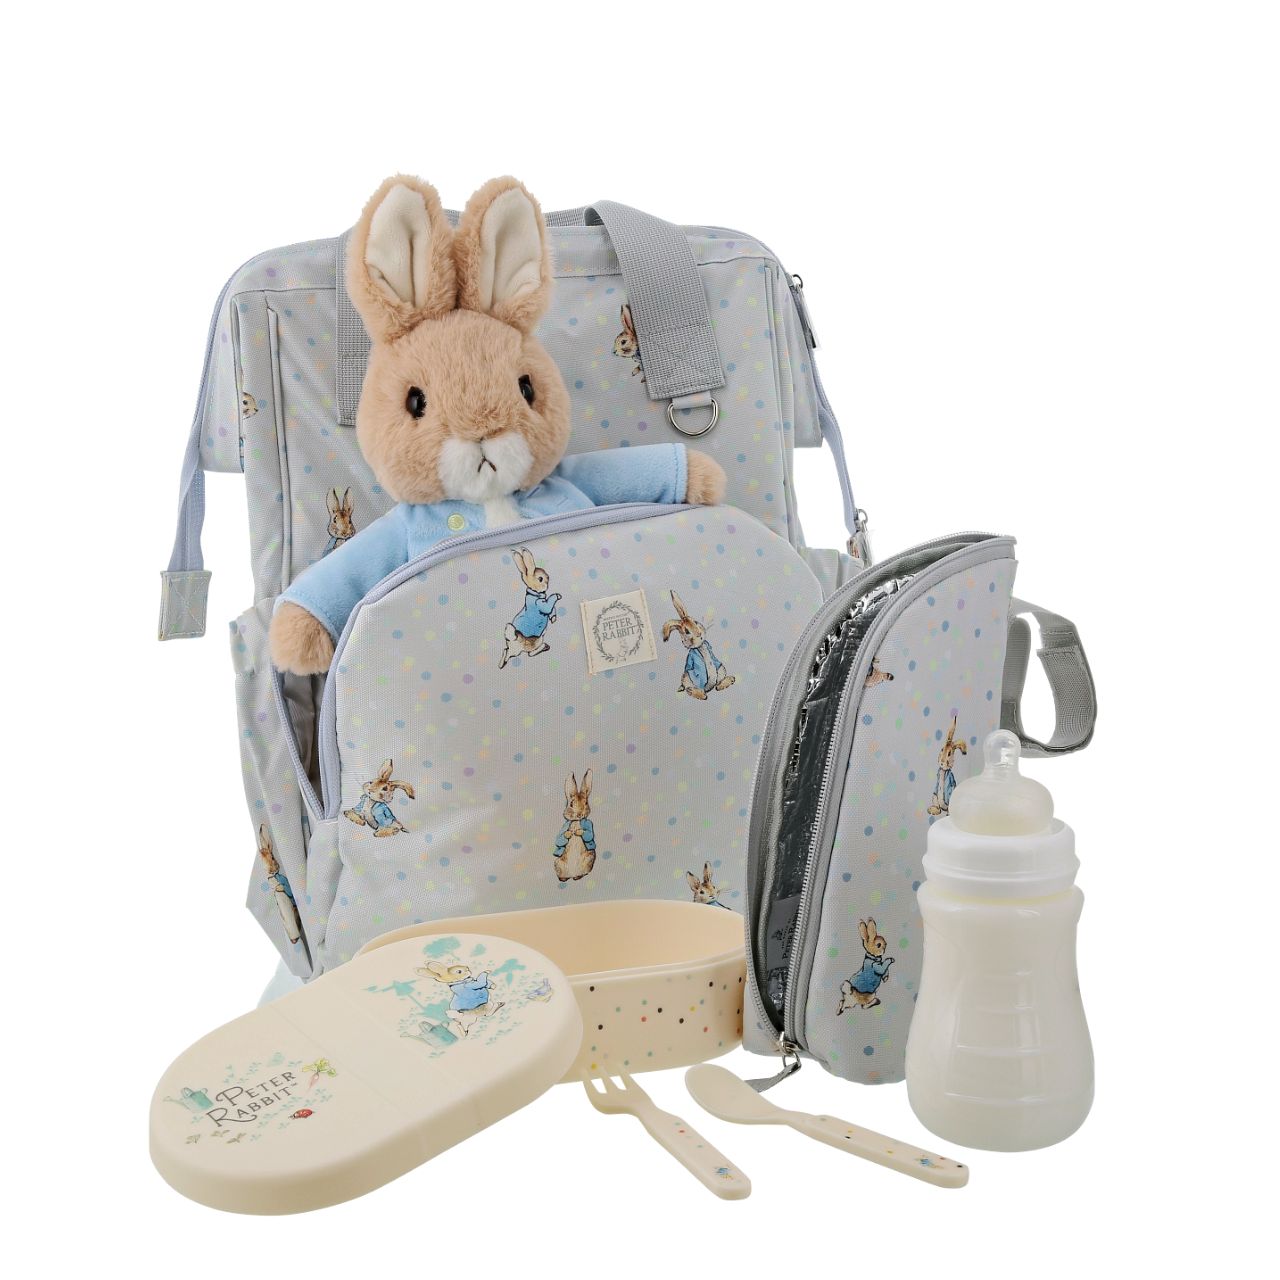 Beatrix Potter Peter Rabbit Large  This Peter Rabbit soft toy is made from beautifully soft fabric and is dressed in clothing exactly as illustrated by Beatrix Potter, with his signature blue jacket. The Peter Rabbit collection features the much loved characters from the Beatrix Potter books and this quality and authentic soft toy is sure to be adored for many years to come.